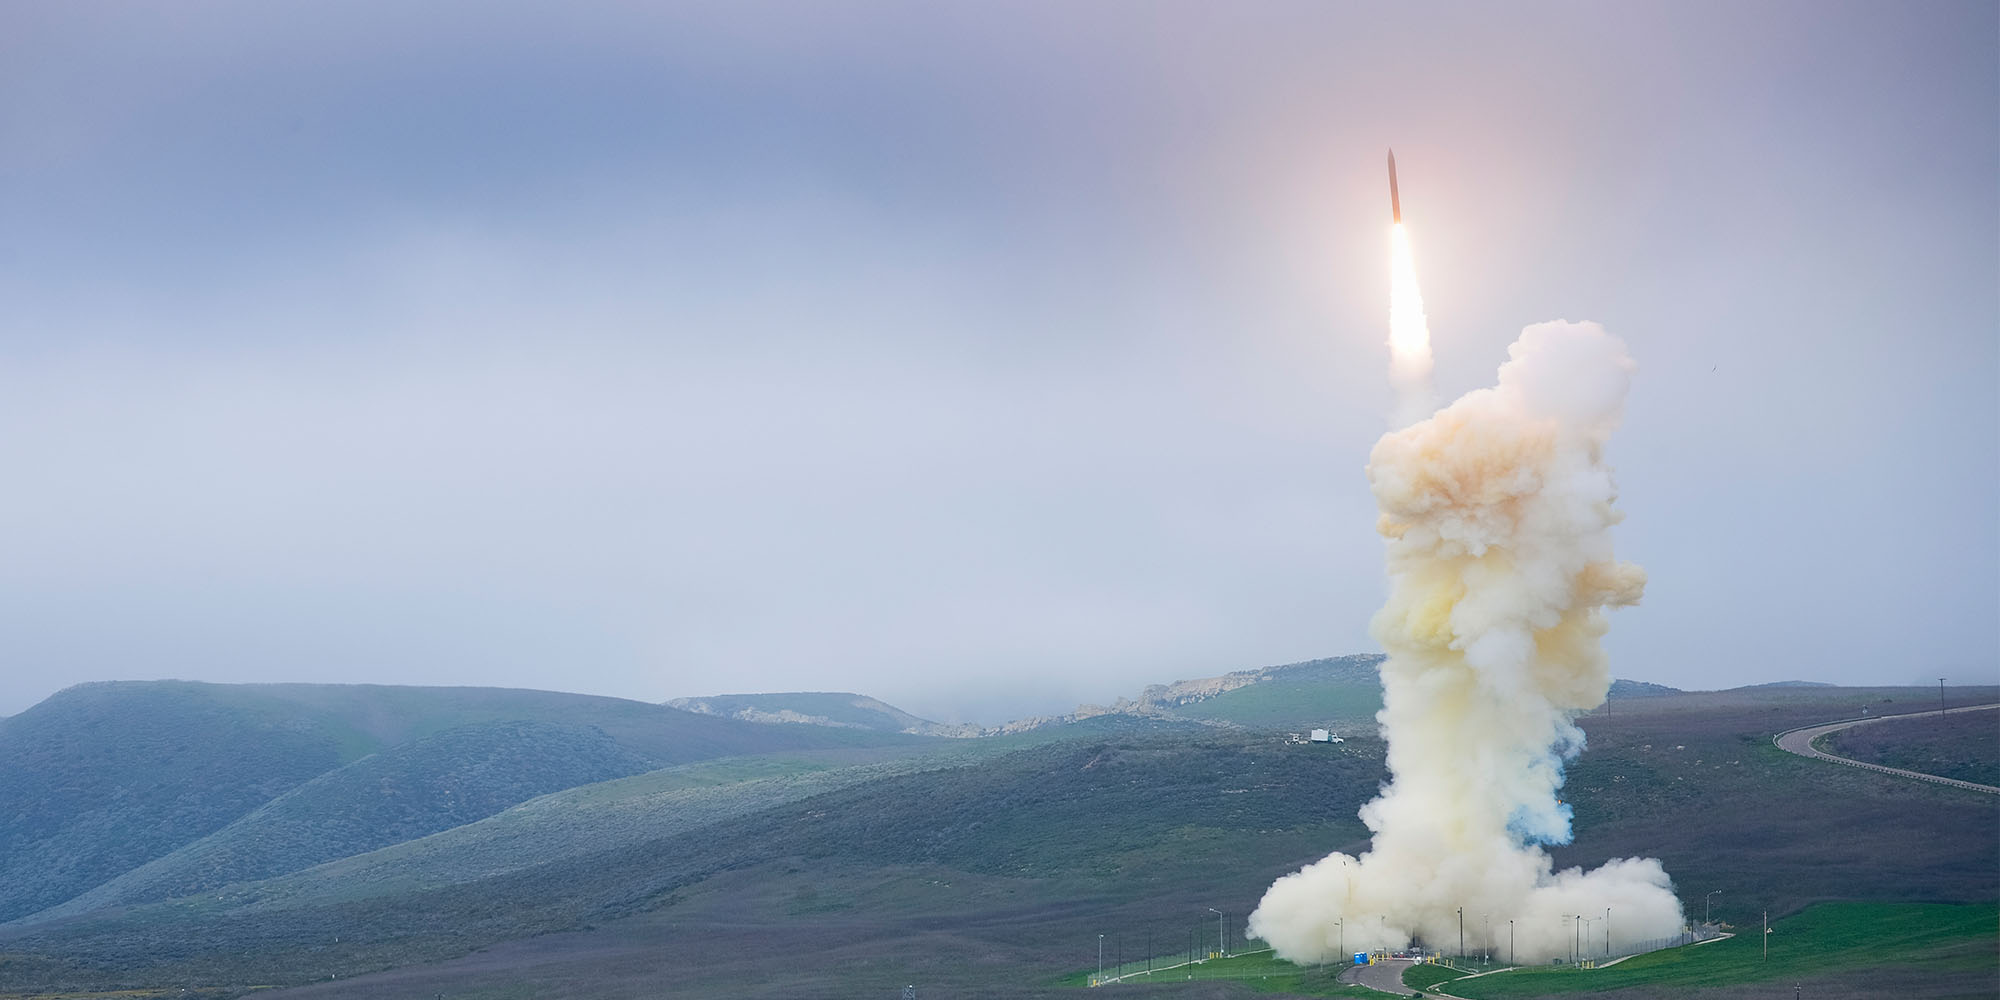 A white missile interceptor launches in front of foggy sky